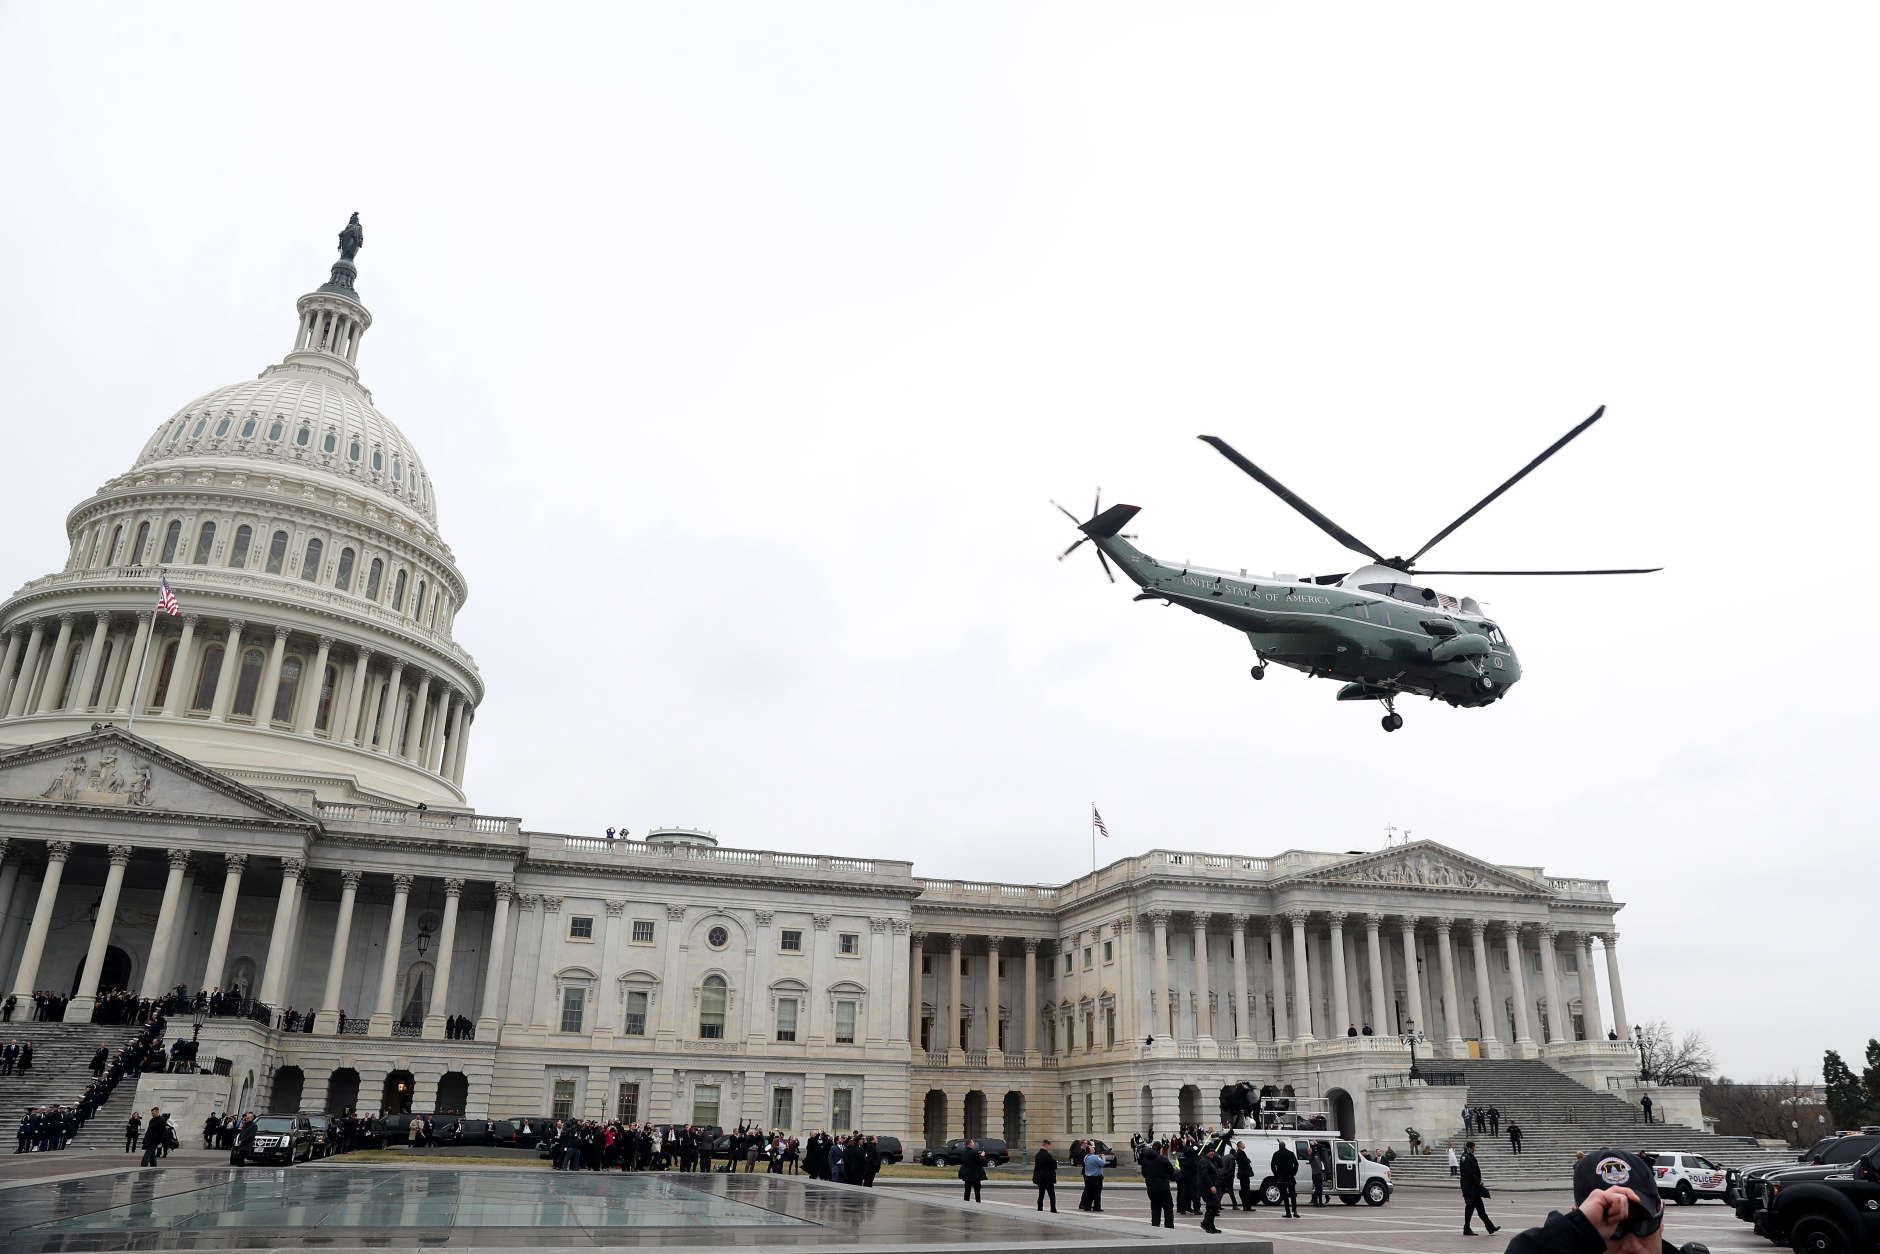 WASHINGTON, DC - JANUARY 20:  WASHINGTON, DC - JANUARY A military helicopter carries former president Barack Obama and Michelle Obama from the U.S. Capitol on January 20, 2017 in Washington, DC. In today's inauguration ceremony Donald J. Trump becomes the 45th president of the United States.  (Photo by Rob Carr/Getty Images)